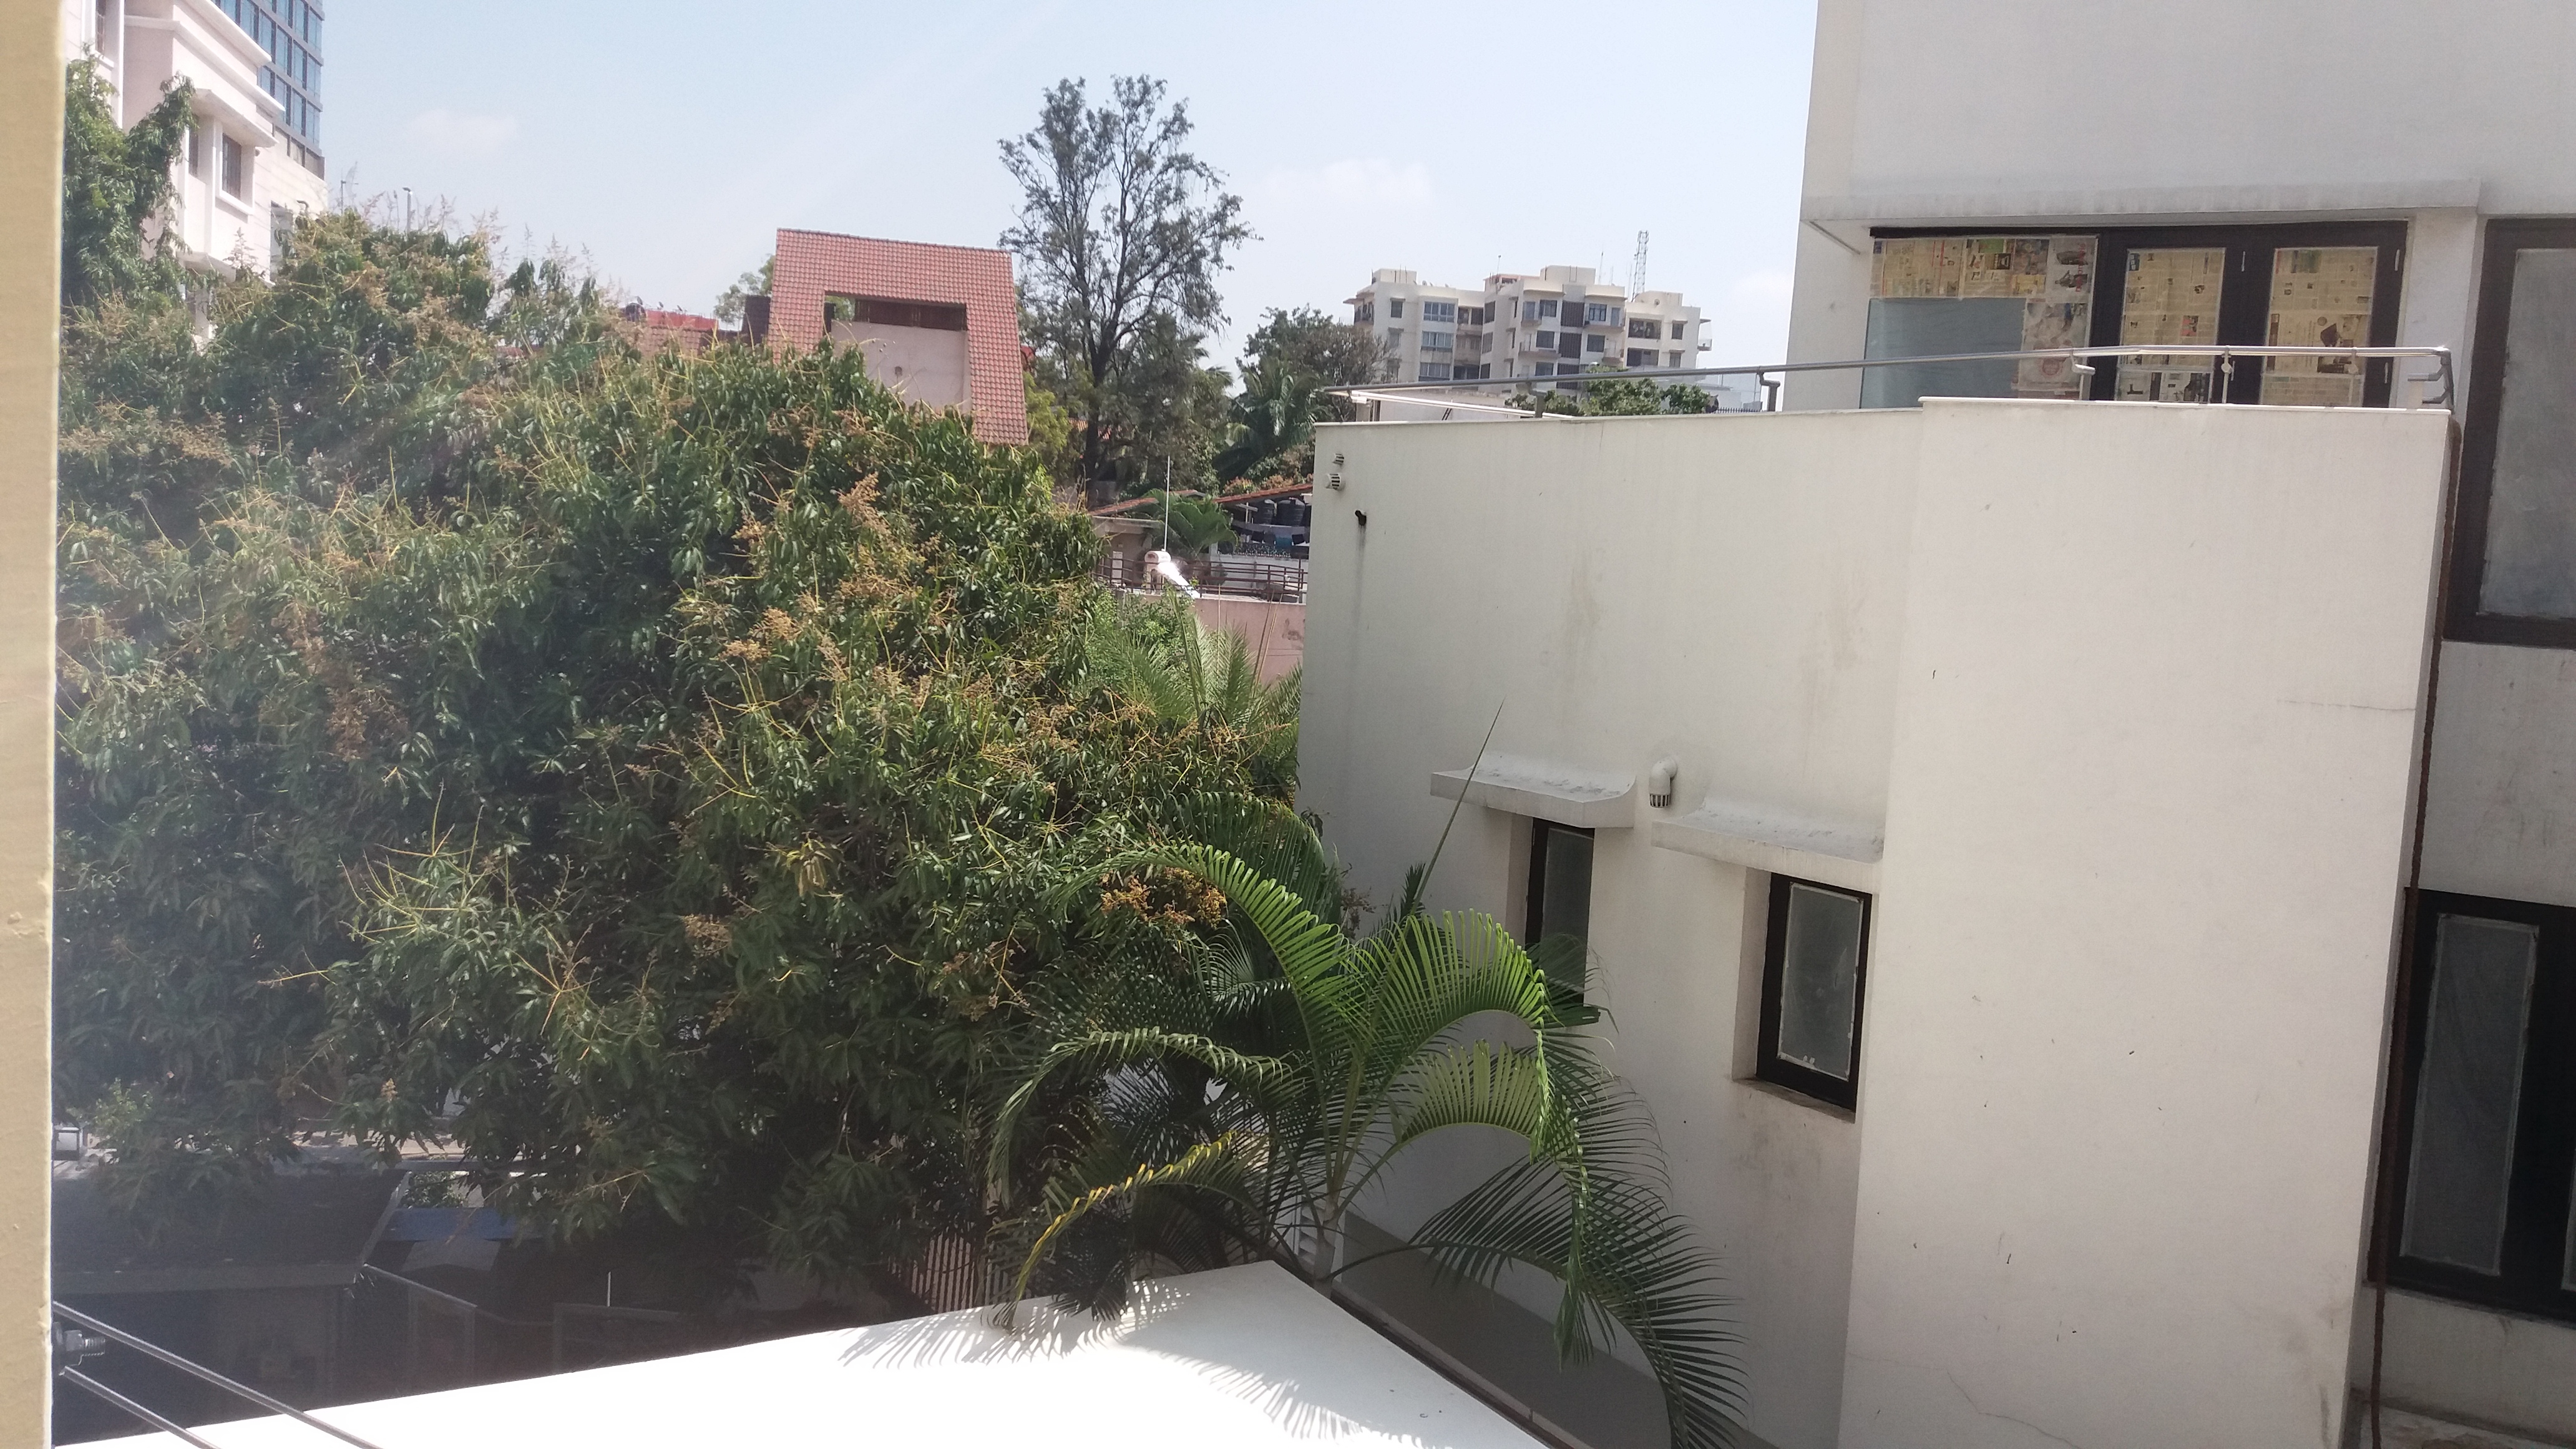 Climate Change and the mango trees in Bangalore